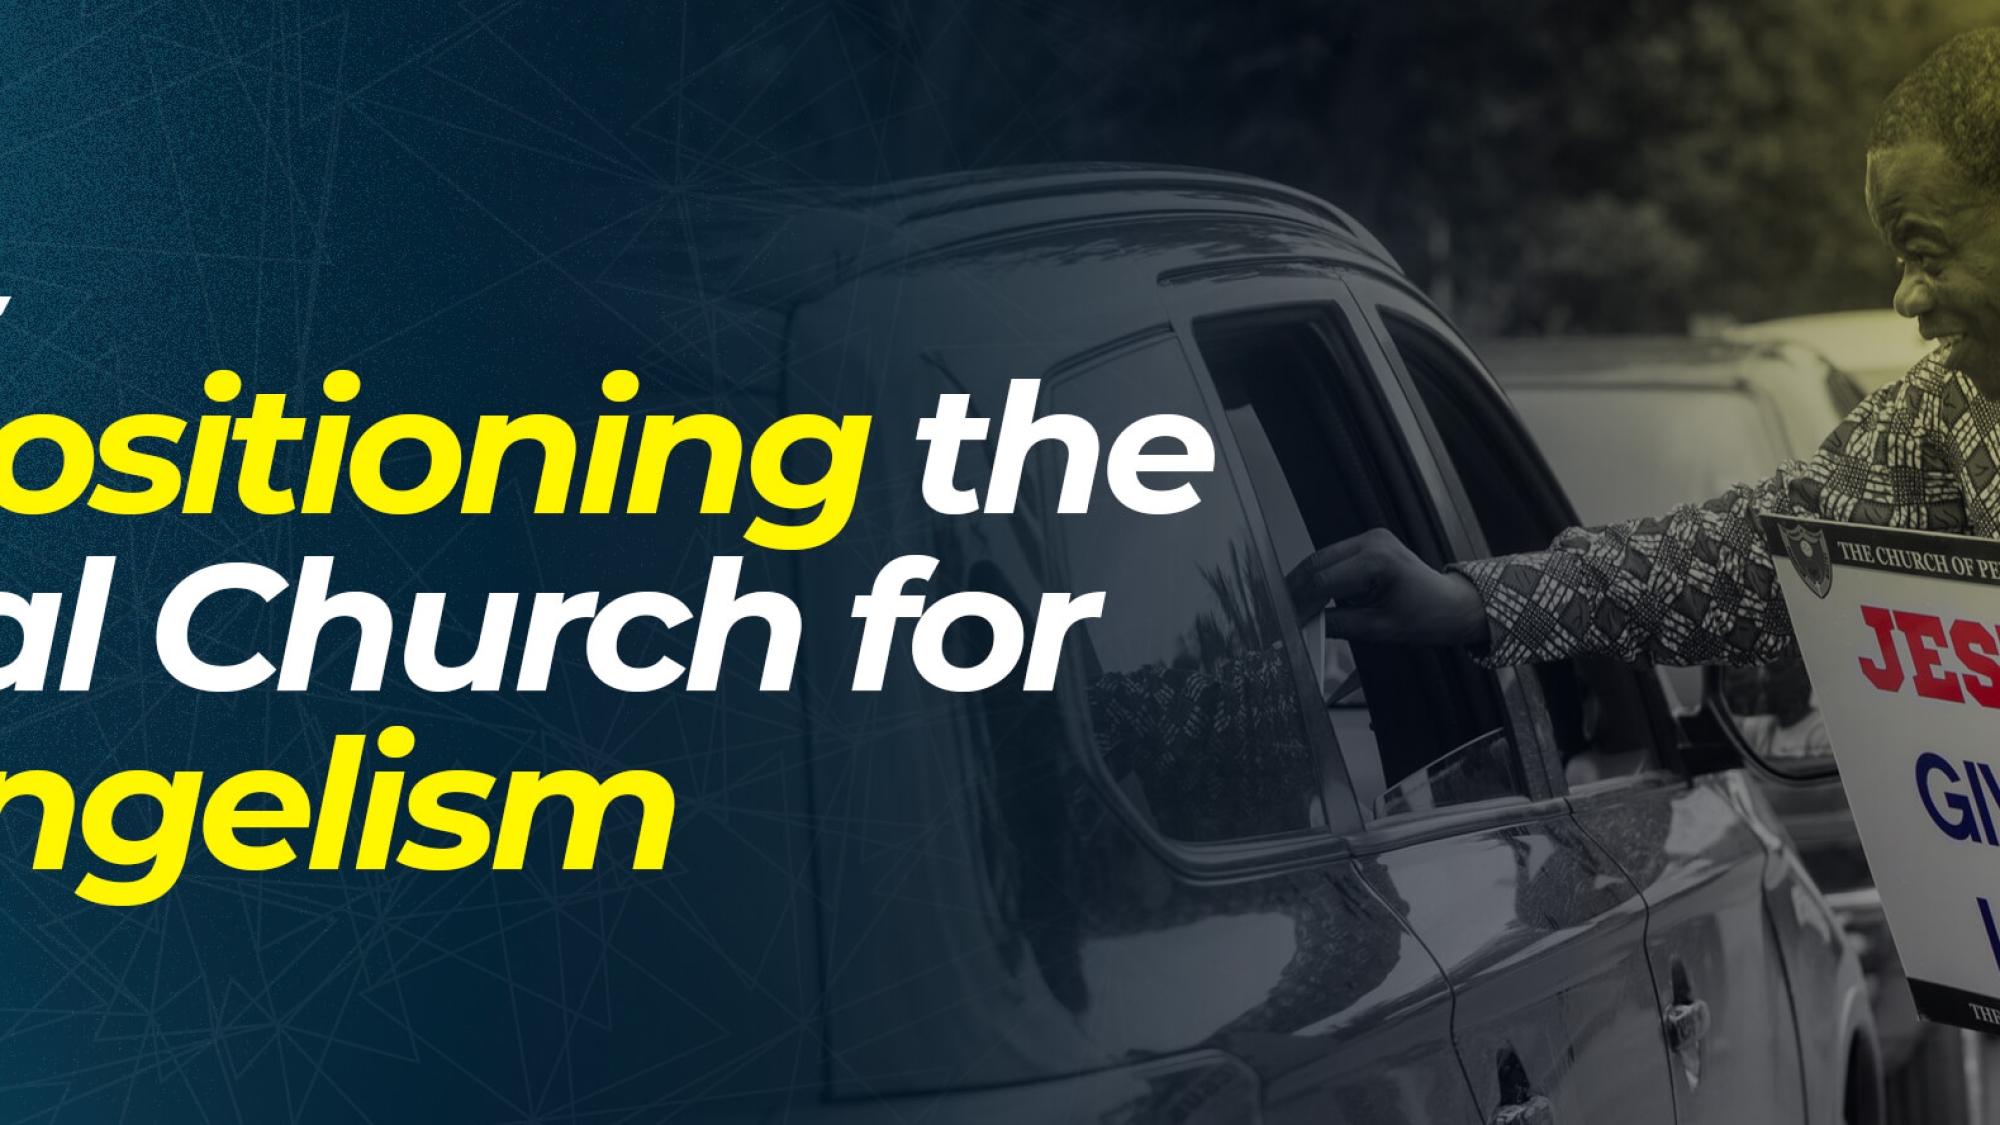 Repositioning The Local Church For Evangelism